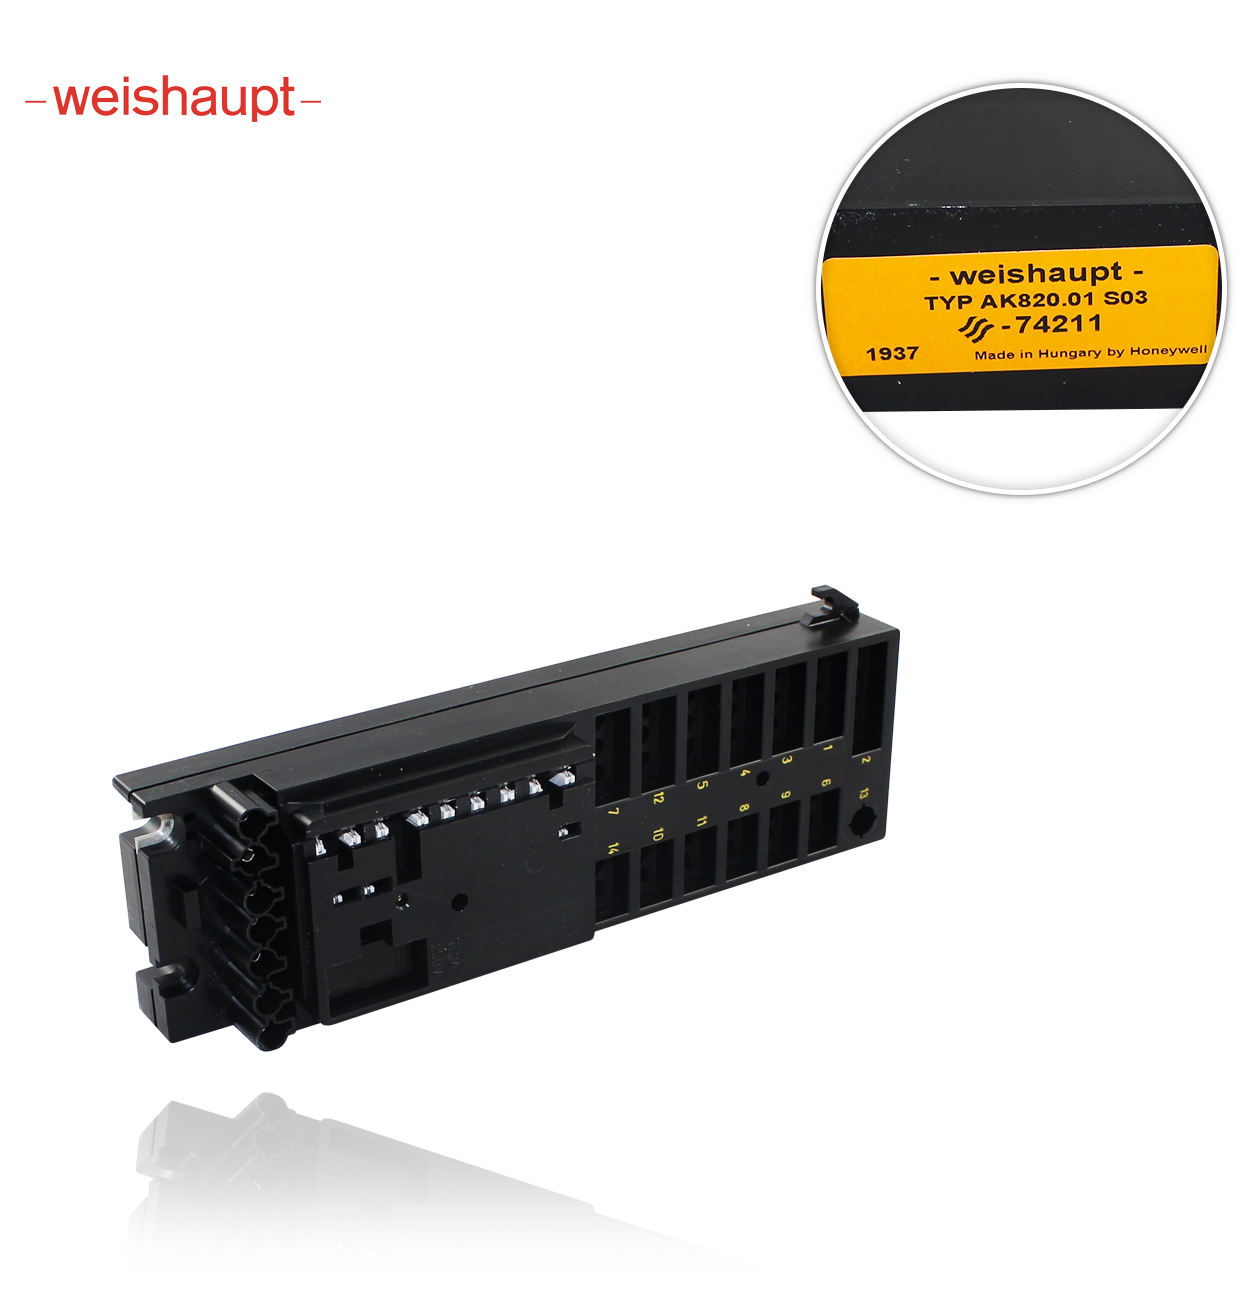 WEISHAUPT 23220012062 AK 820.01 S03 CONNECTION TERMINAL for WG10-A/WG20-A